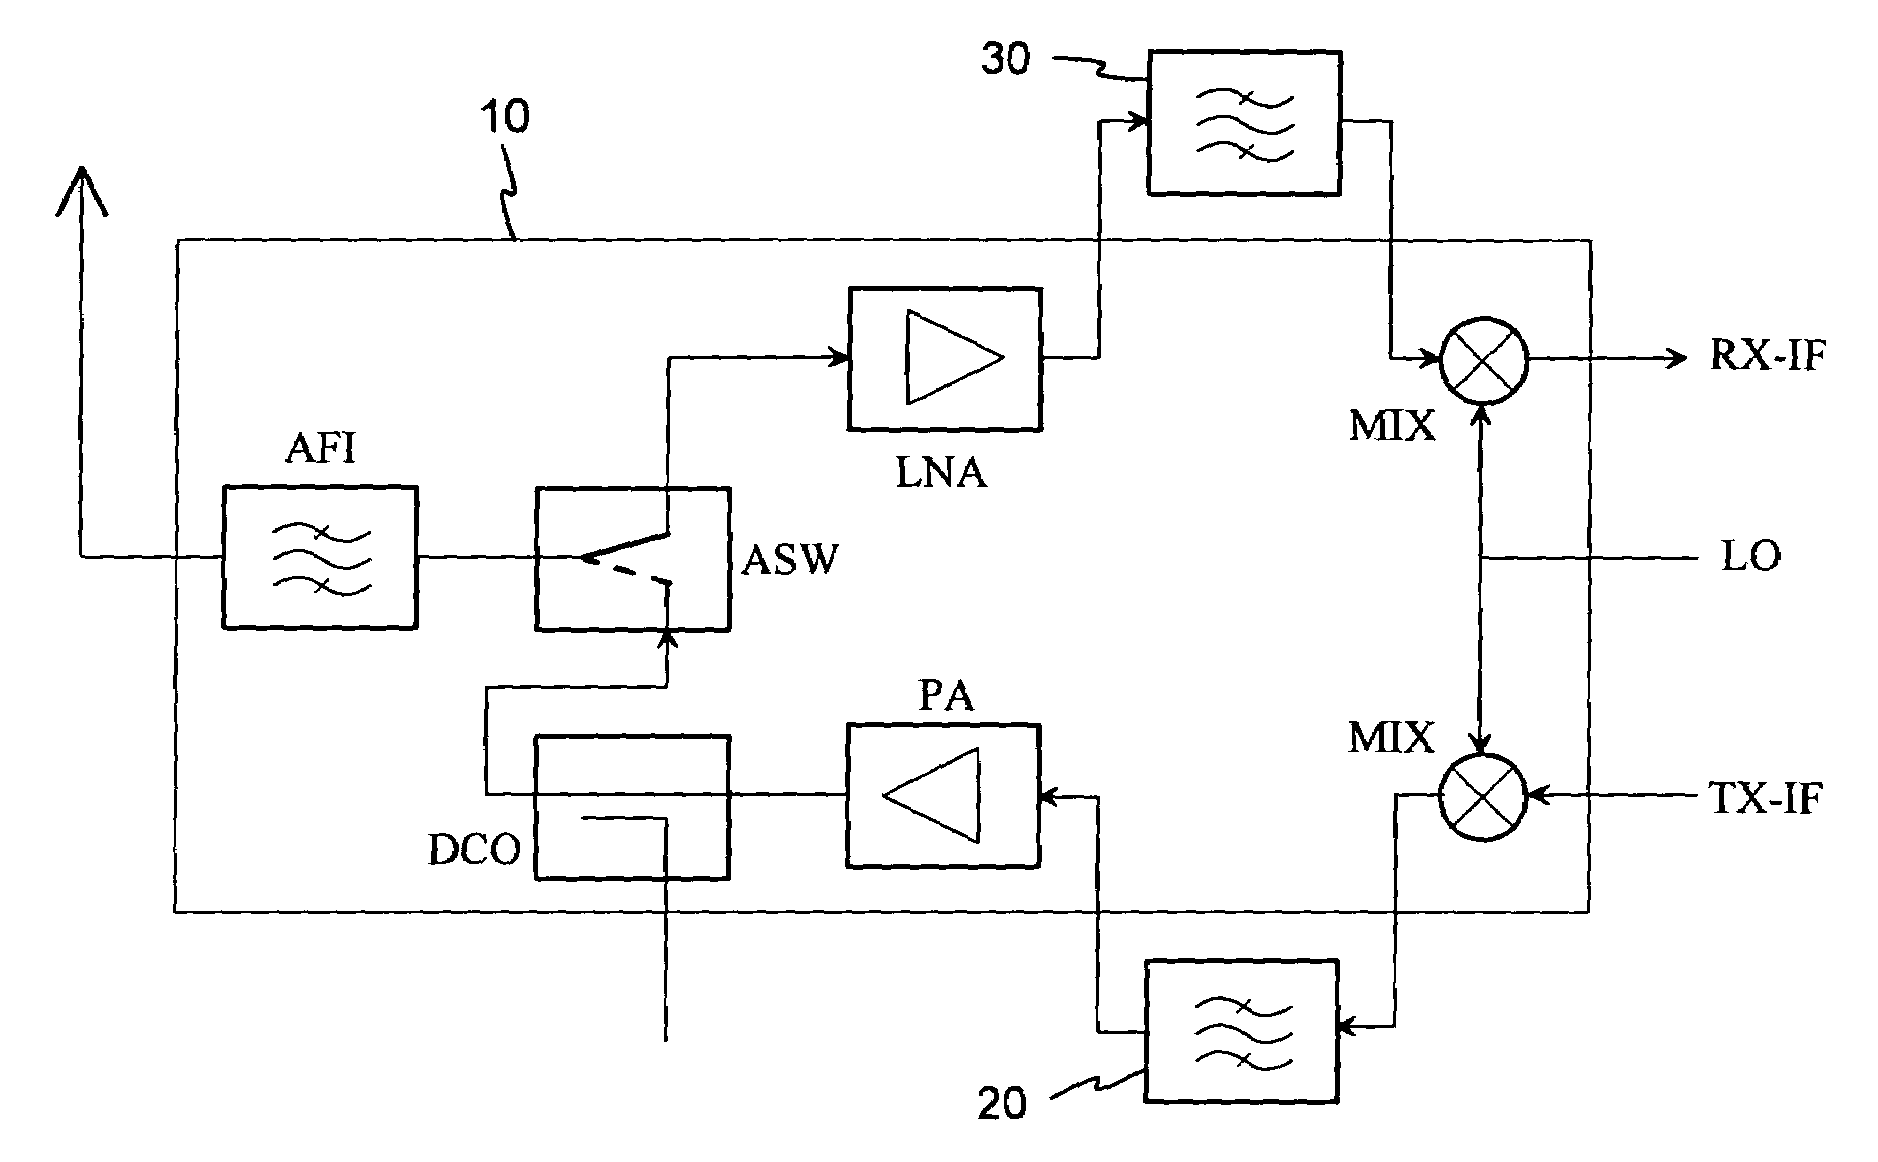 Structure of a radio-frequency front end